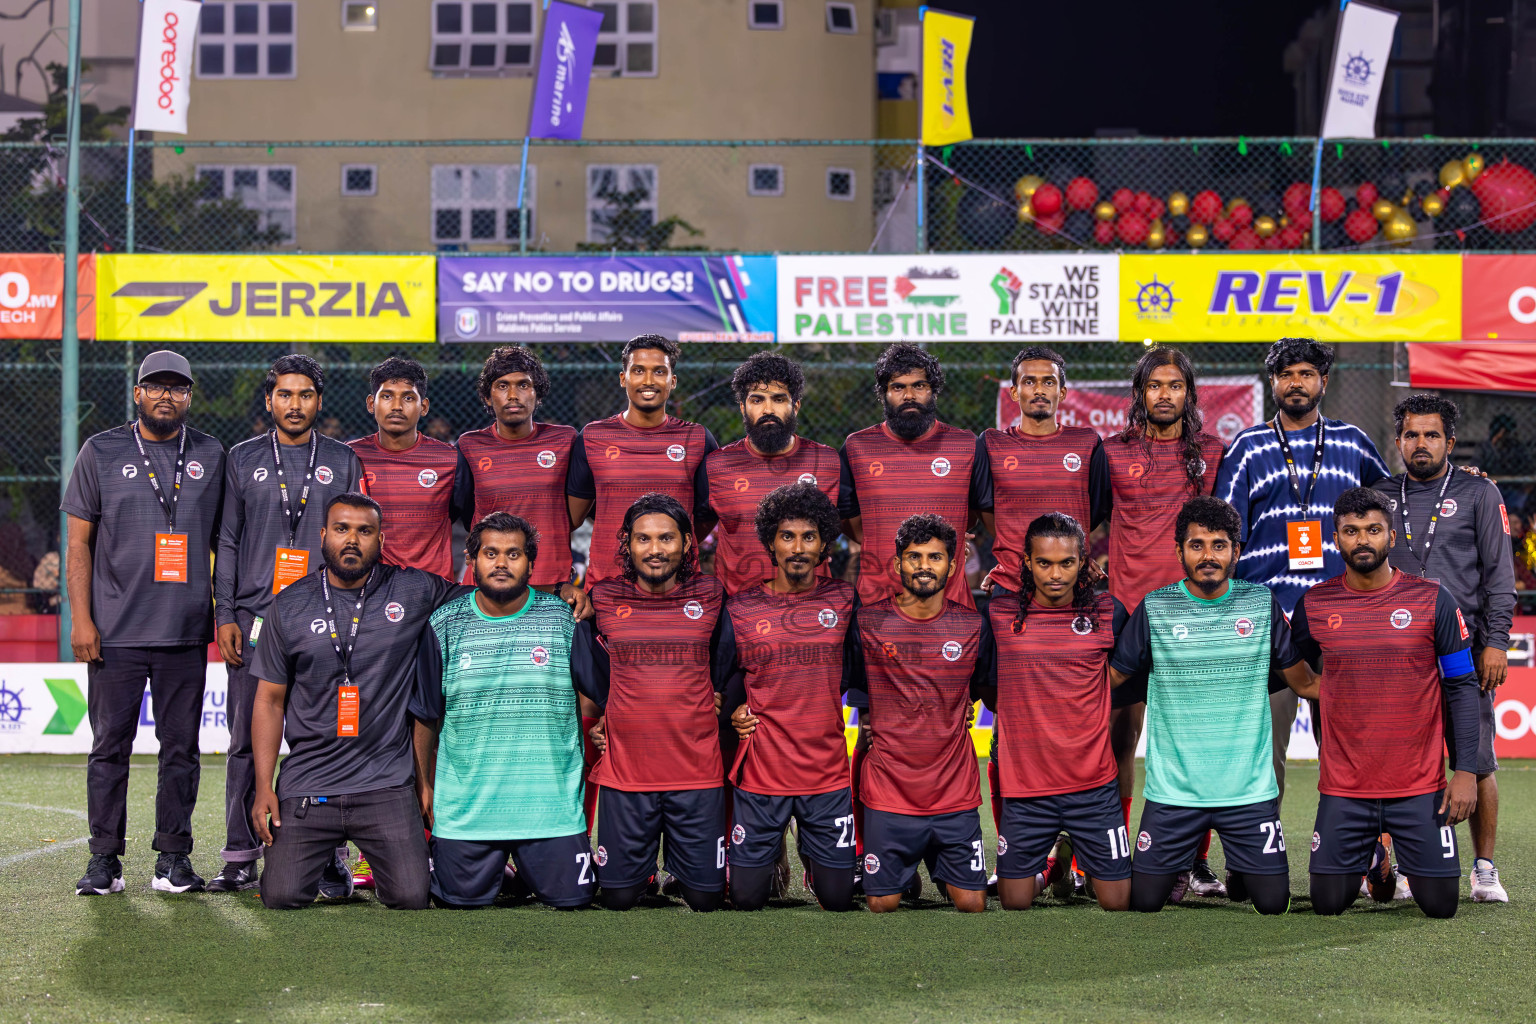 Th Thimarafushi vs Th Omadhoo in Day 27 of Golden Futsal Challenge 2024 was held on Saturday , 10th February 2024 in Hulhumale', Maldives
Photos: Ismail Thoriq / images.mv